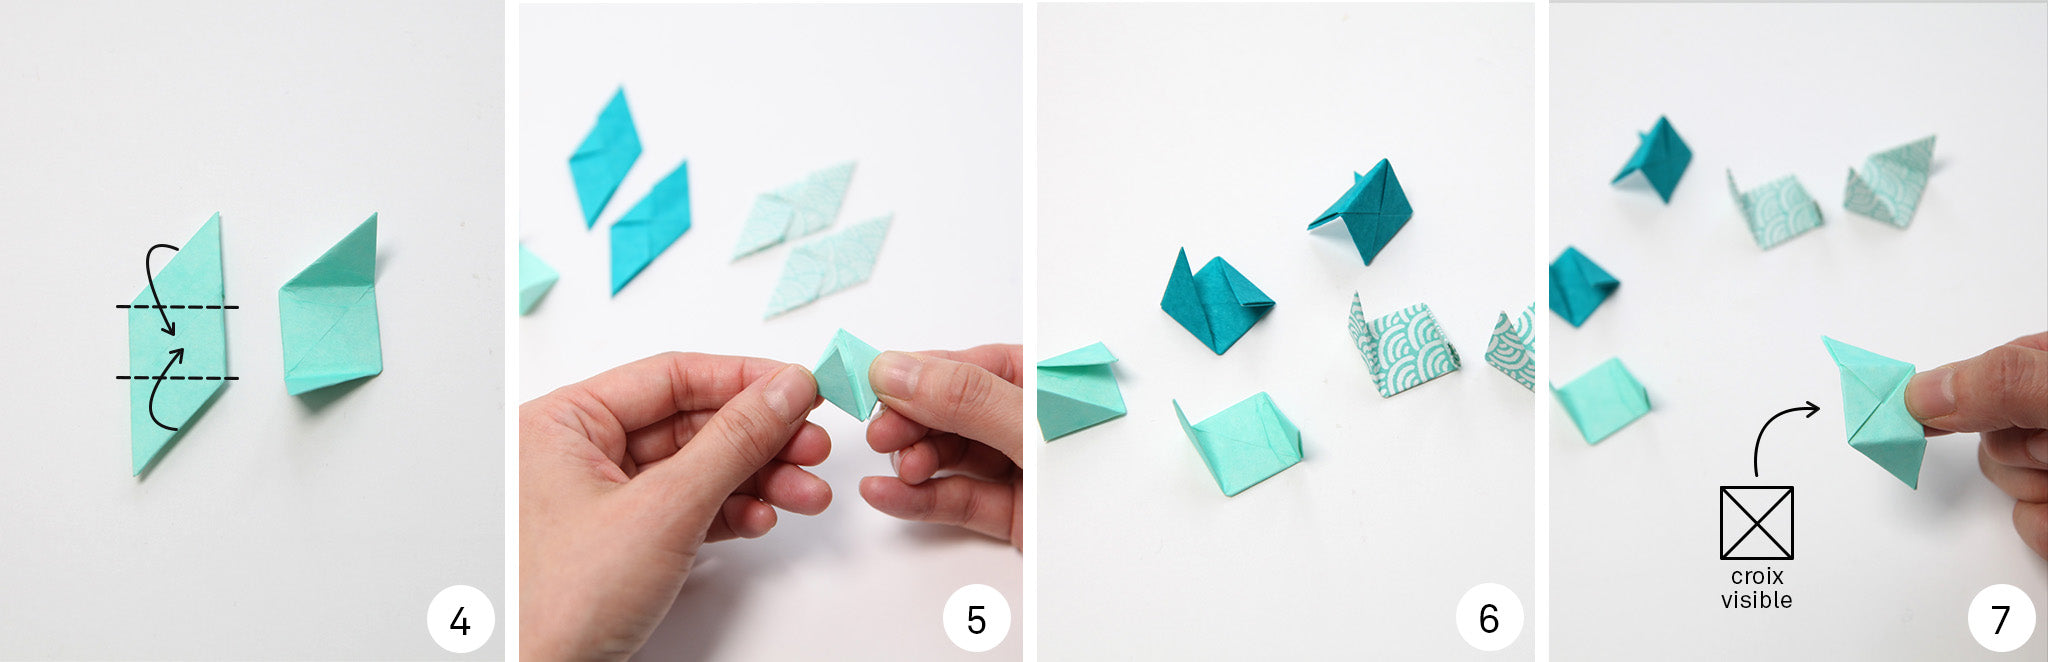 article-tuto-cube-origami-suspend-montage-elements-step-4-7